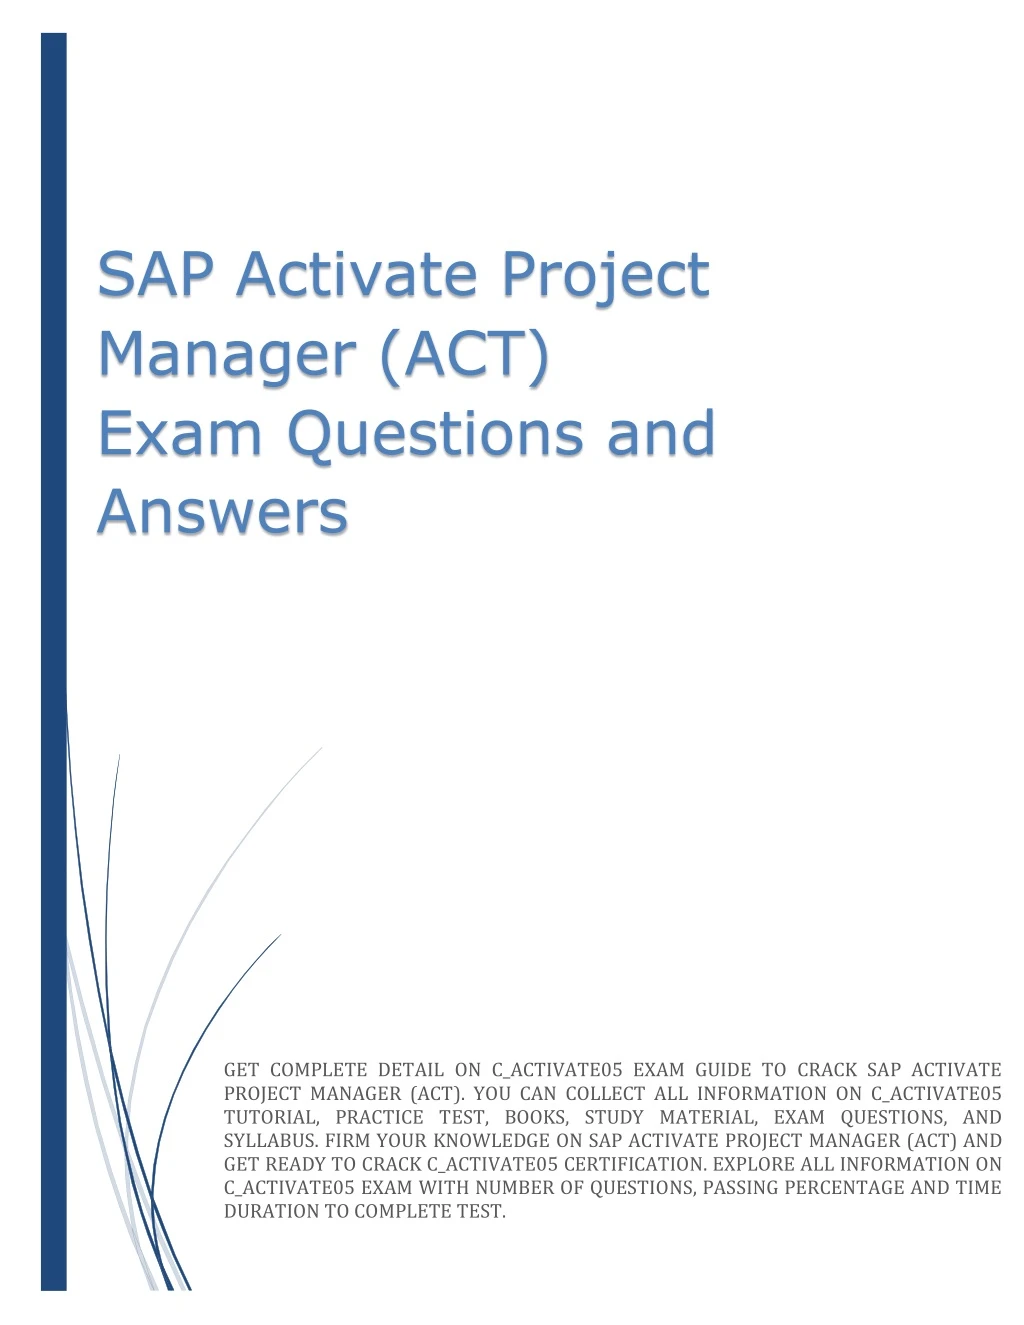 sap activate project manager act exam questions